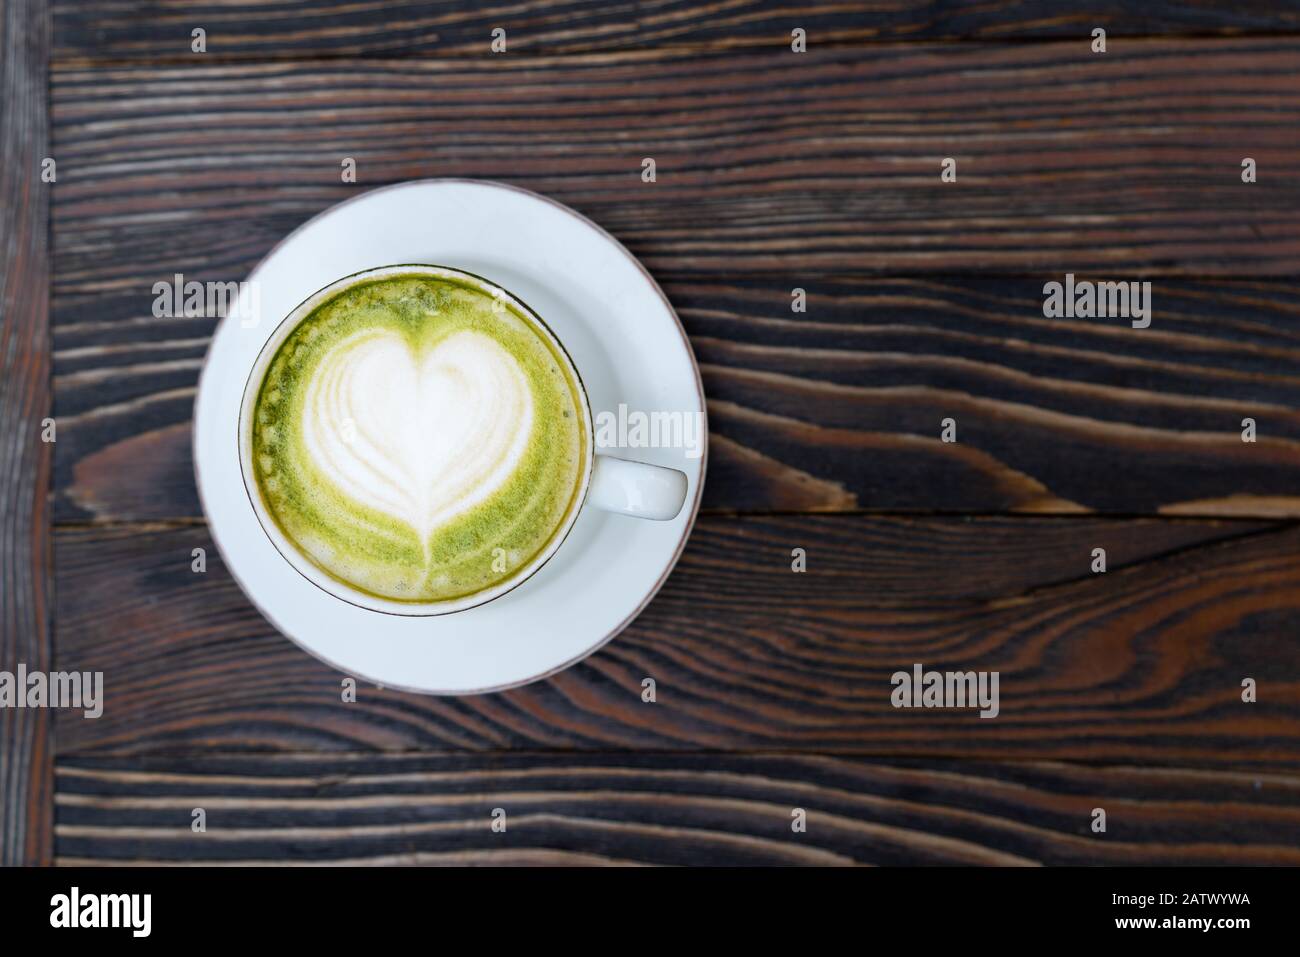 Green matcha tea latte in a white cup on brown wooden background isolated Stock Photo